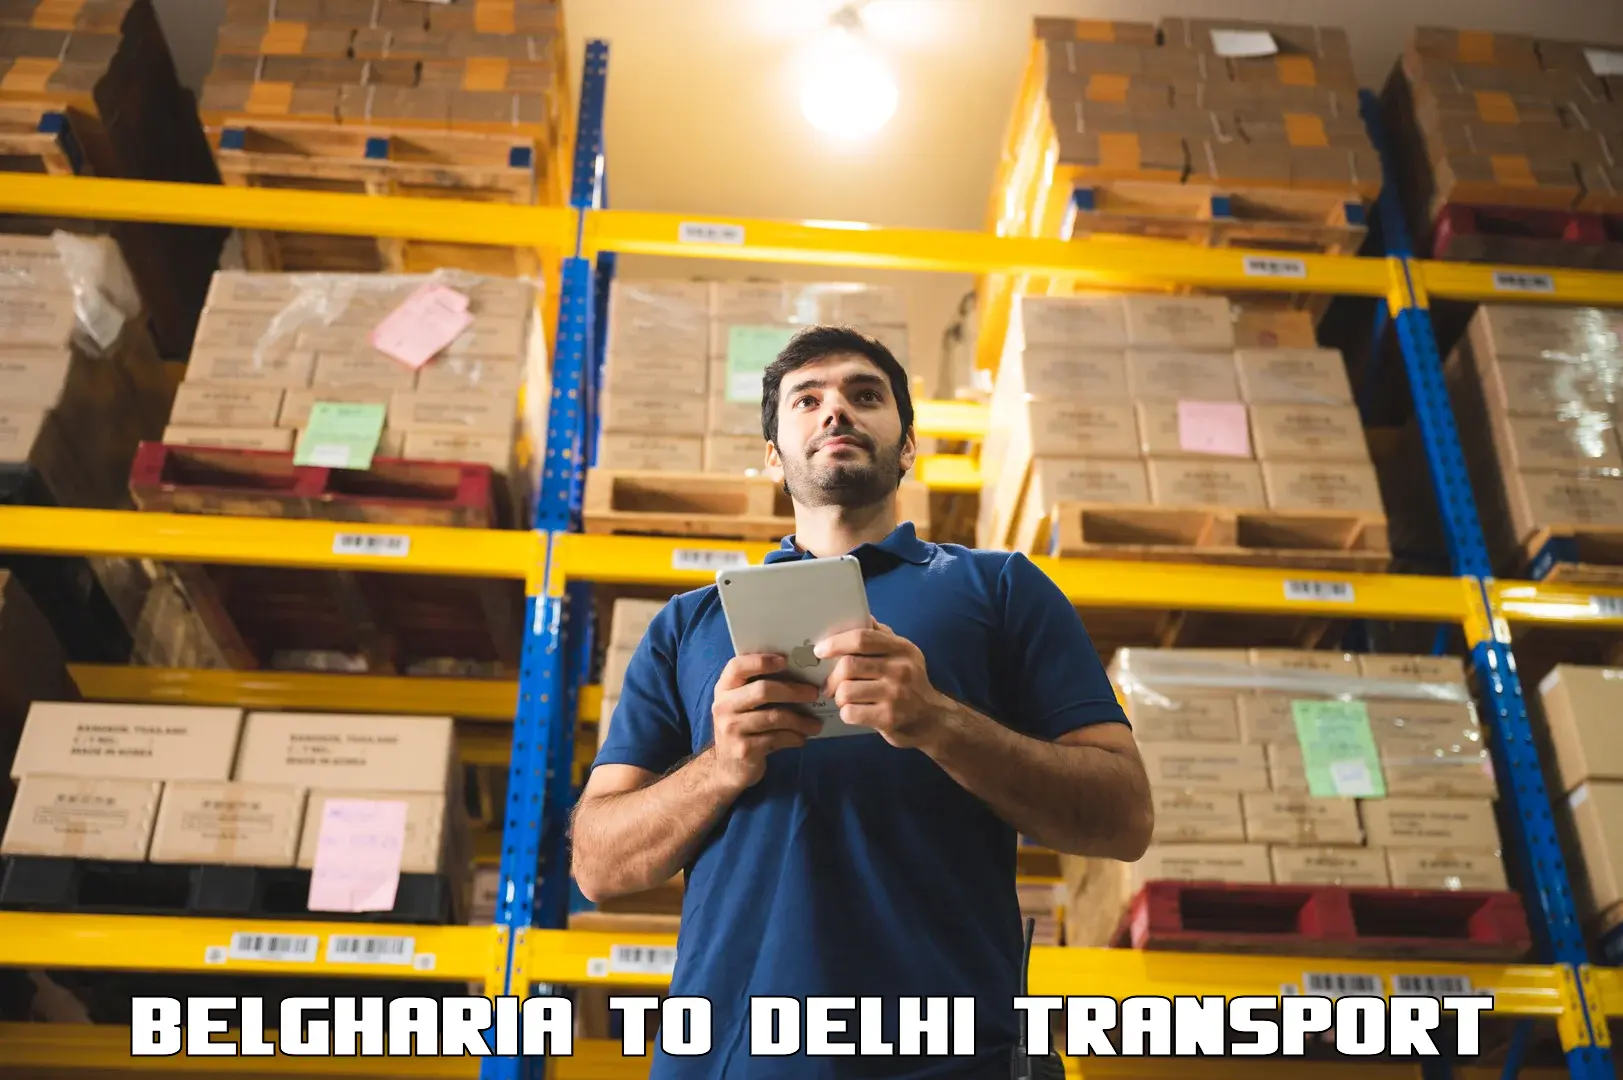 Truck transport companies in India Belgharia to NCR